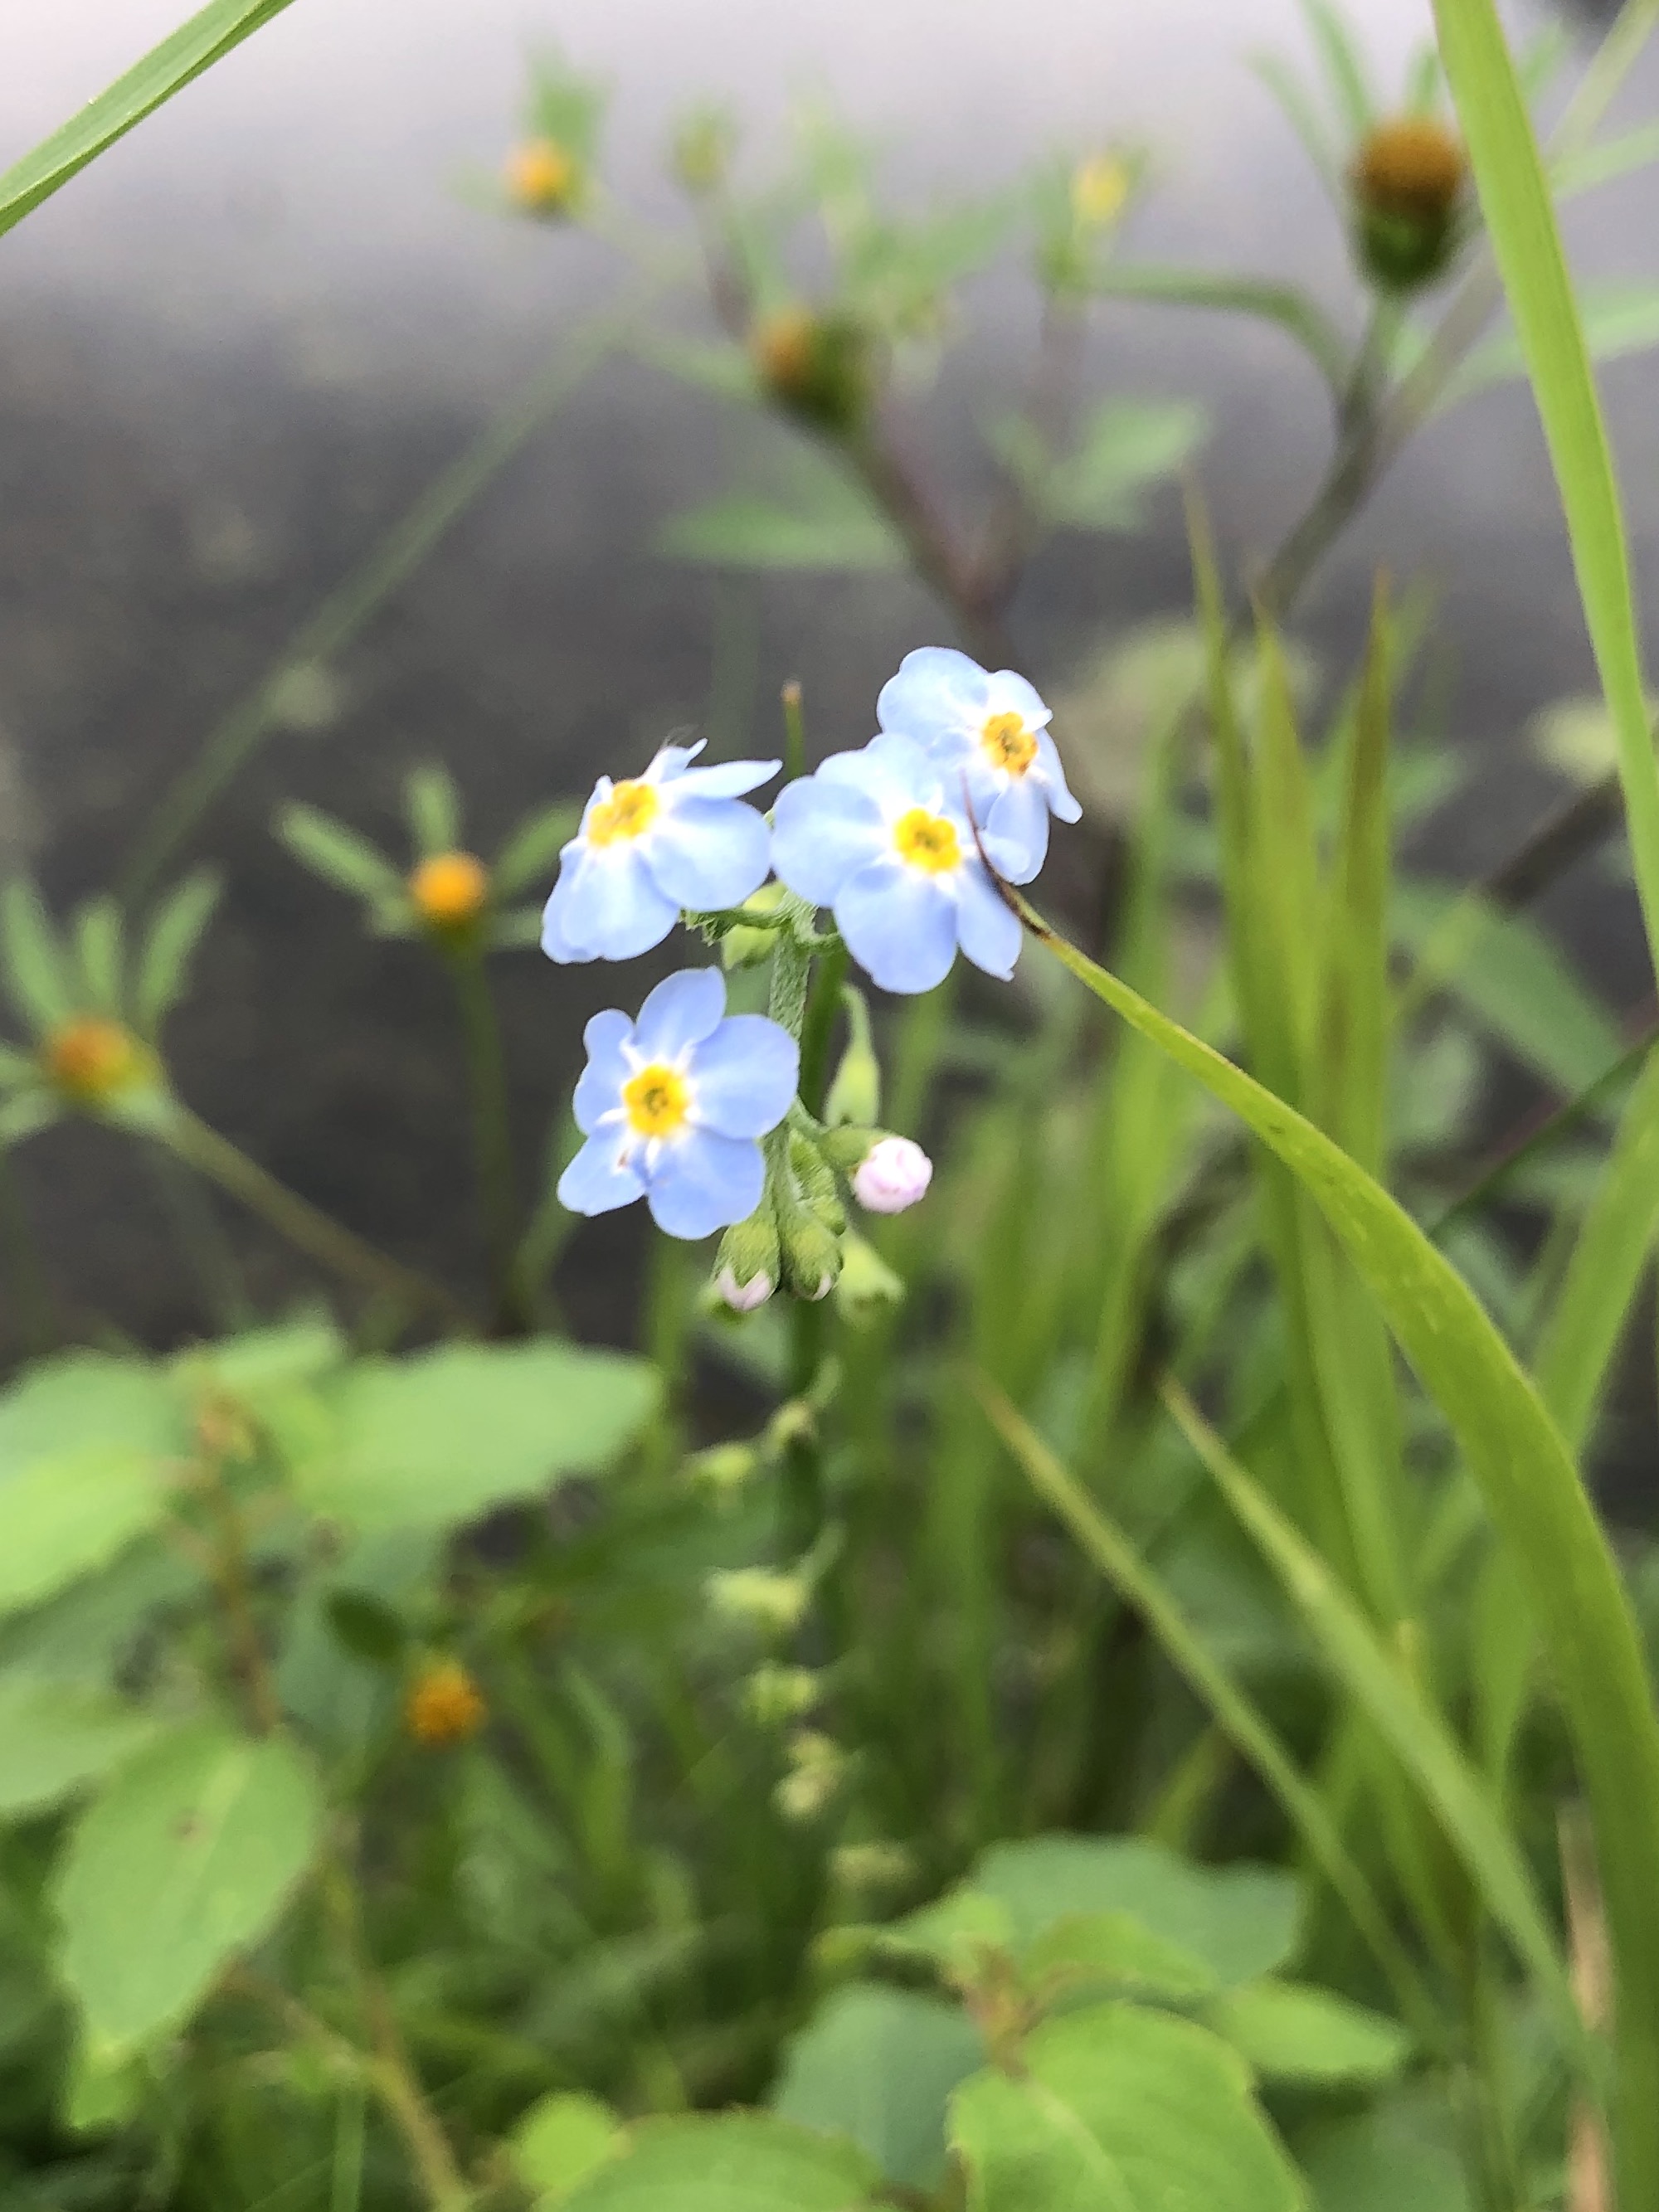 True Forget-me-not on shore of Vilas Park lagoon in Madison, Wisconsin on September 4, 2021.